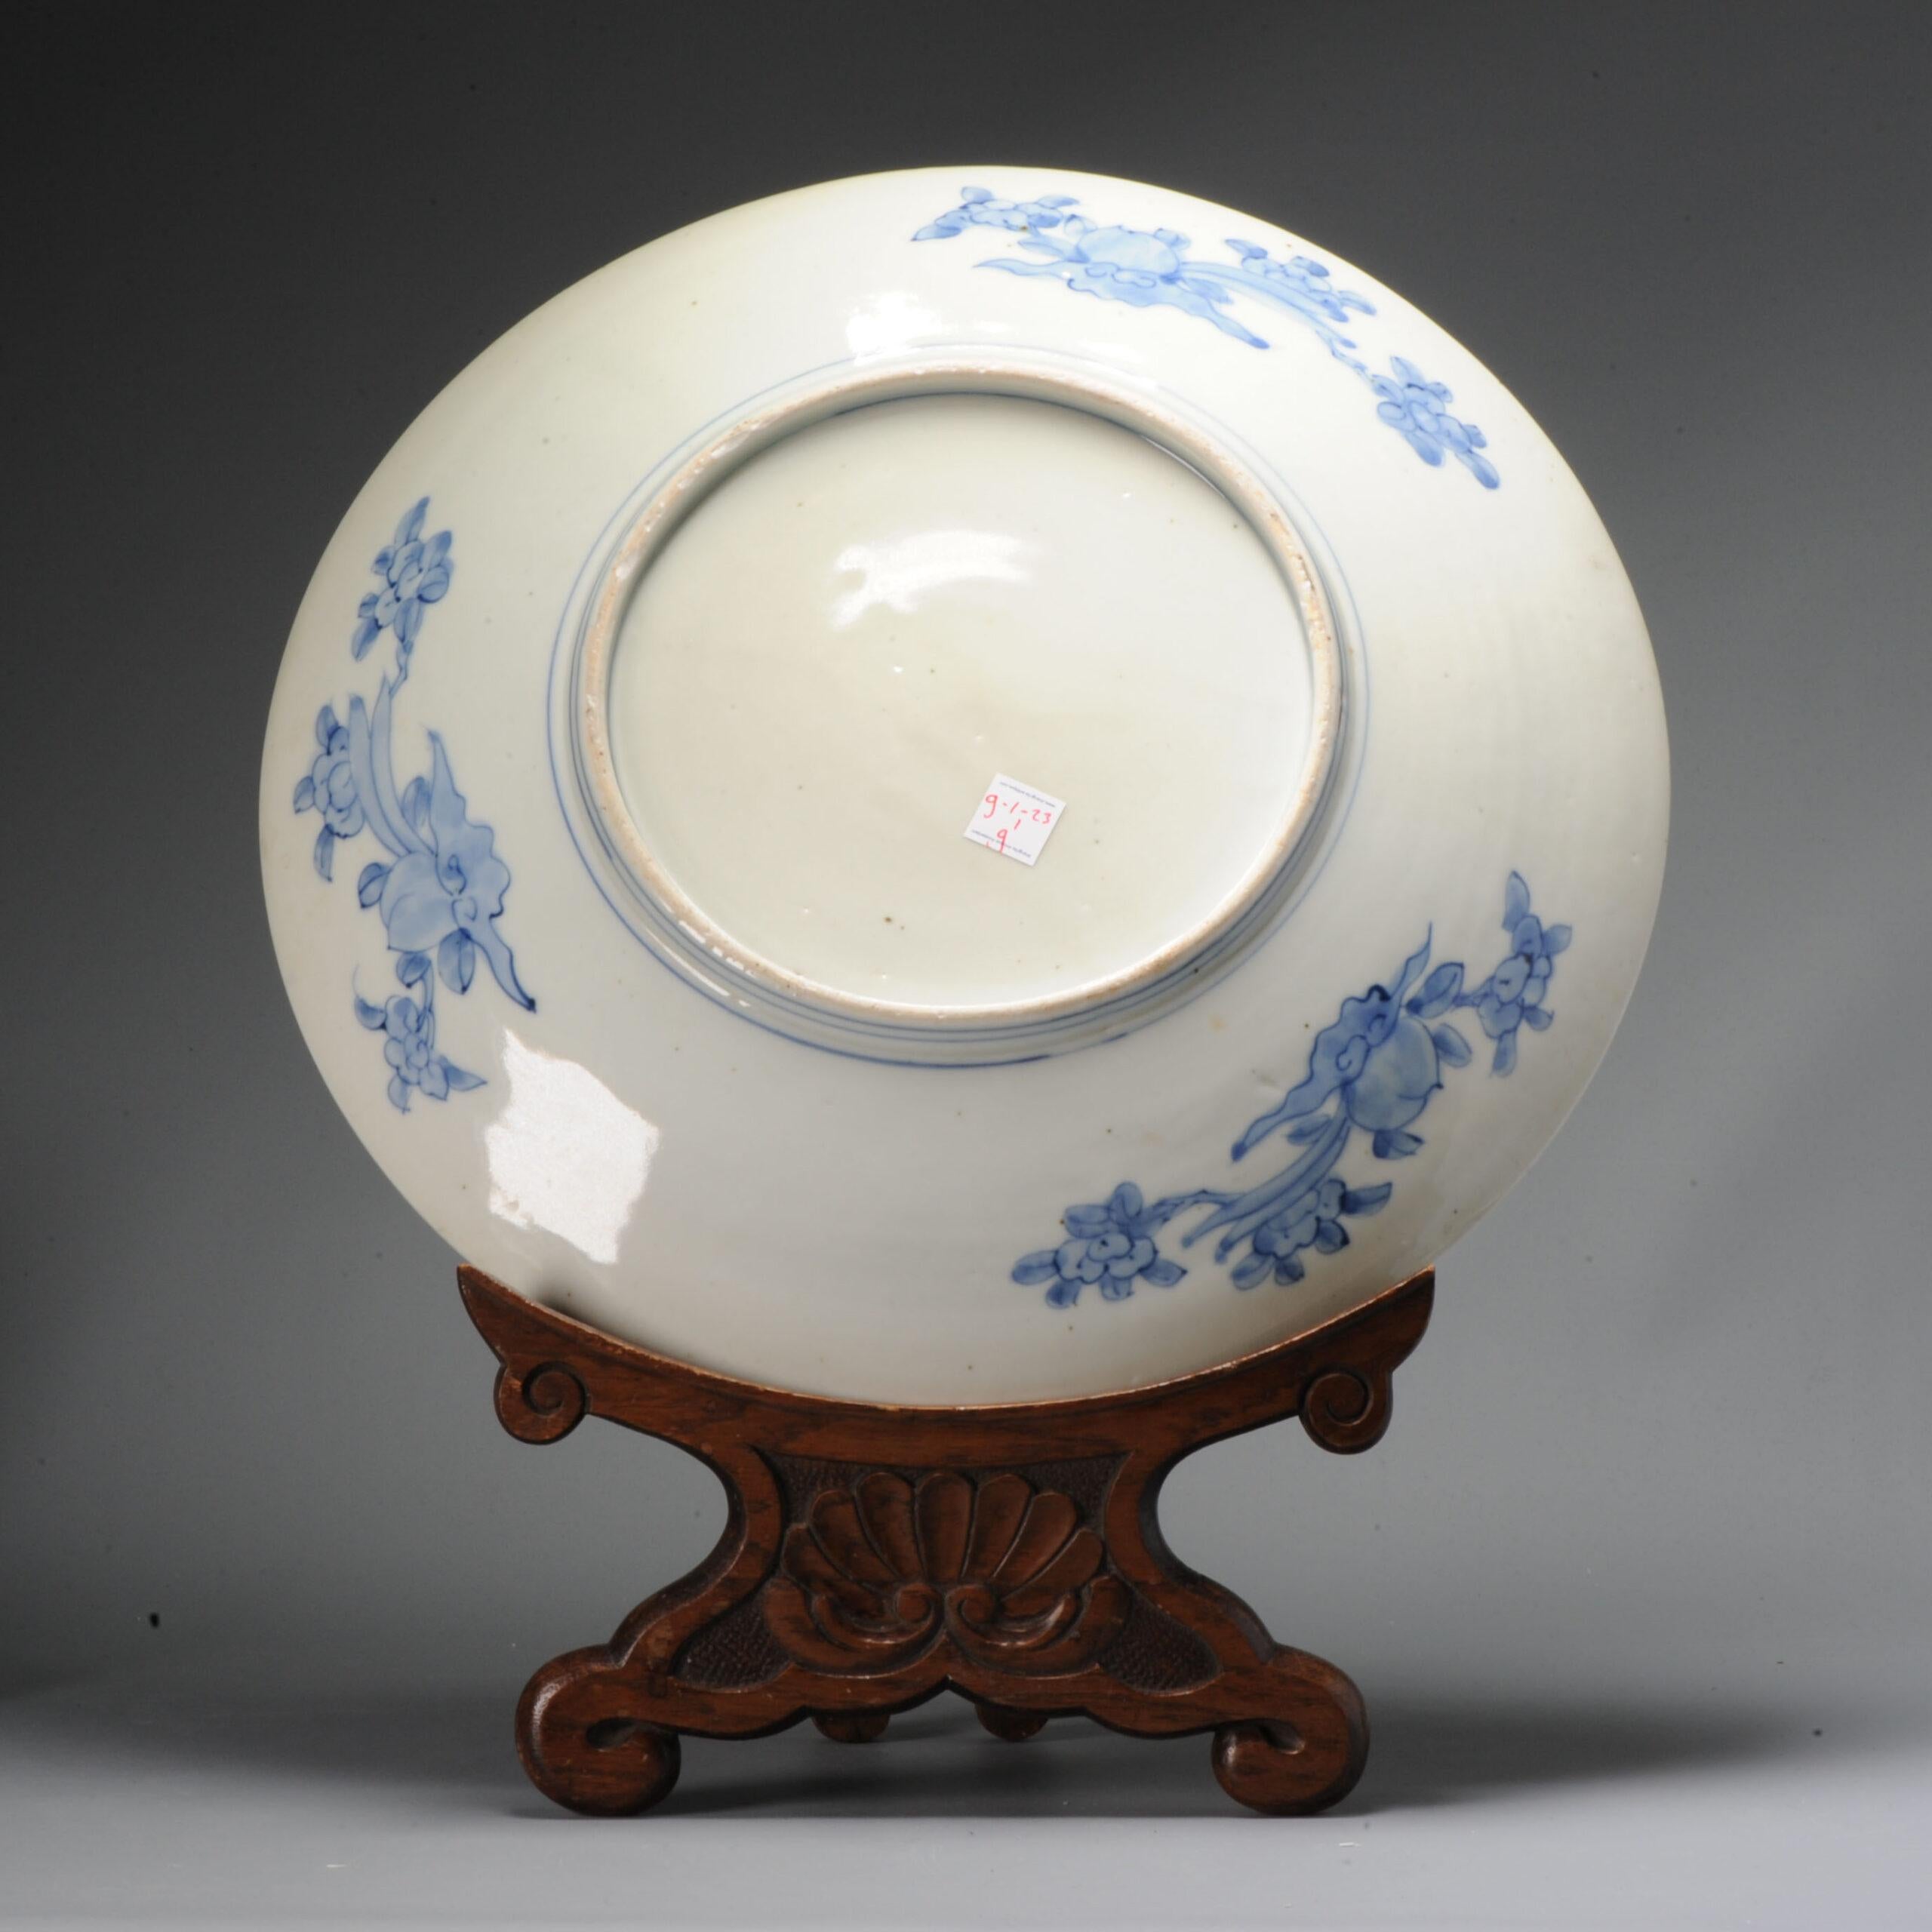 19th Century Antique Meiji Period 19 / 20C Japanese Porcelain Swan/Geese Charger Arita For Sale